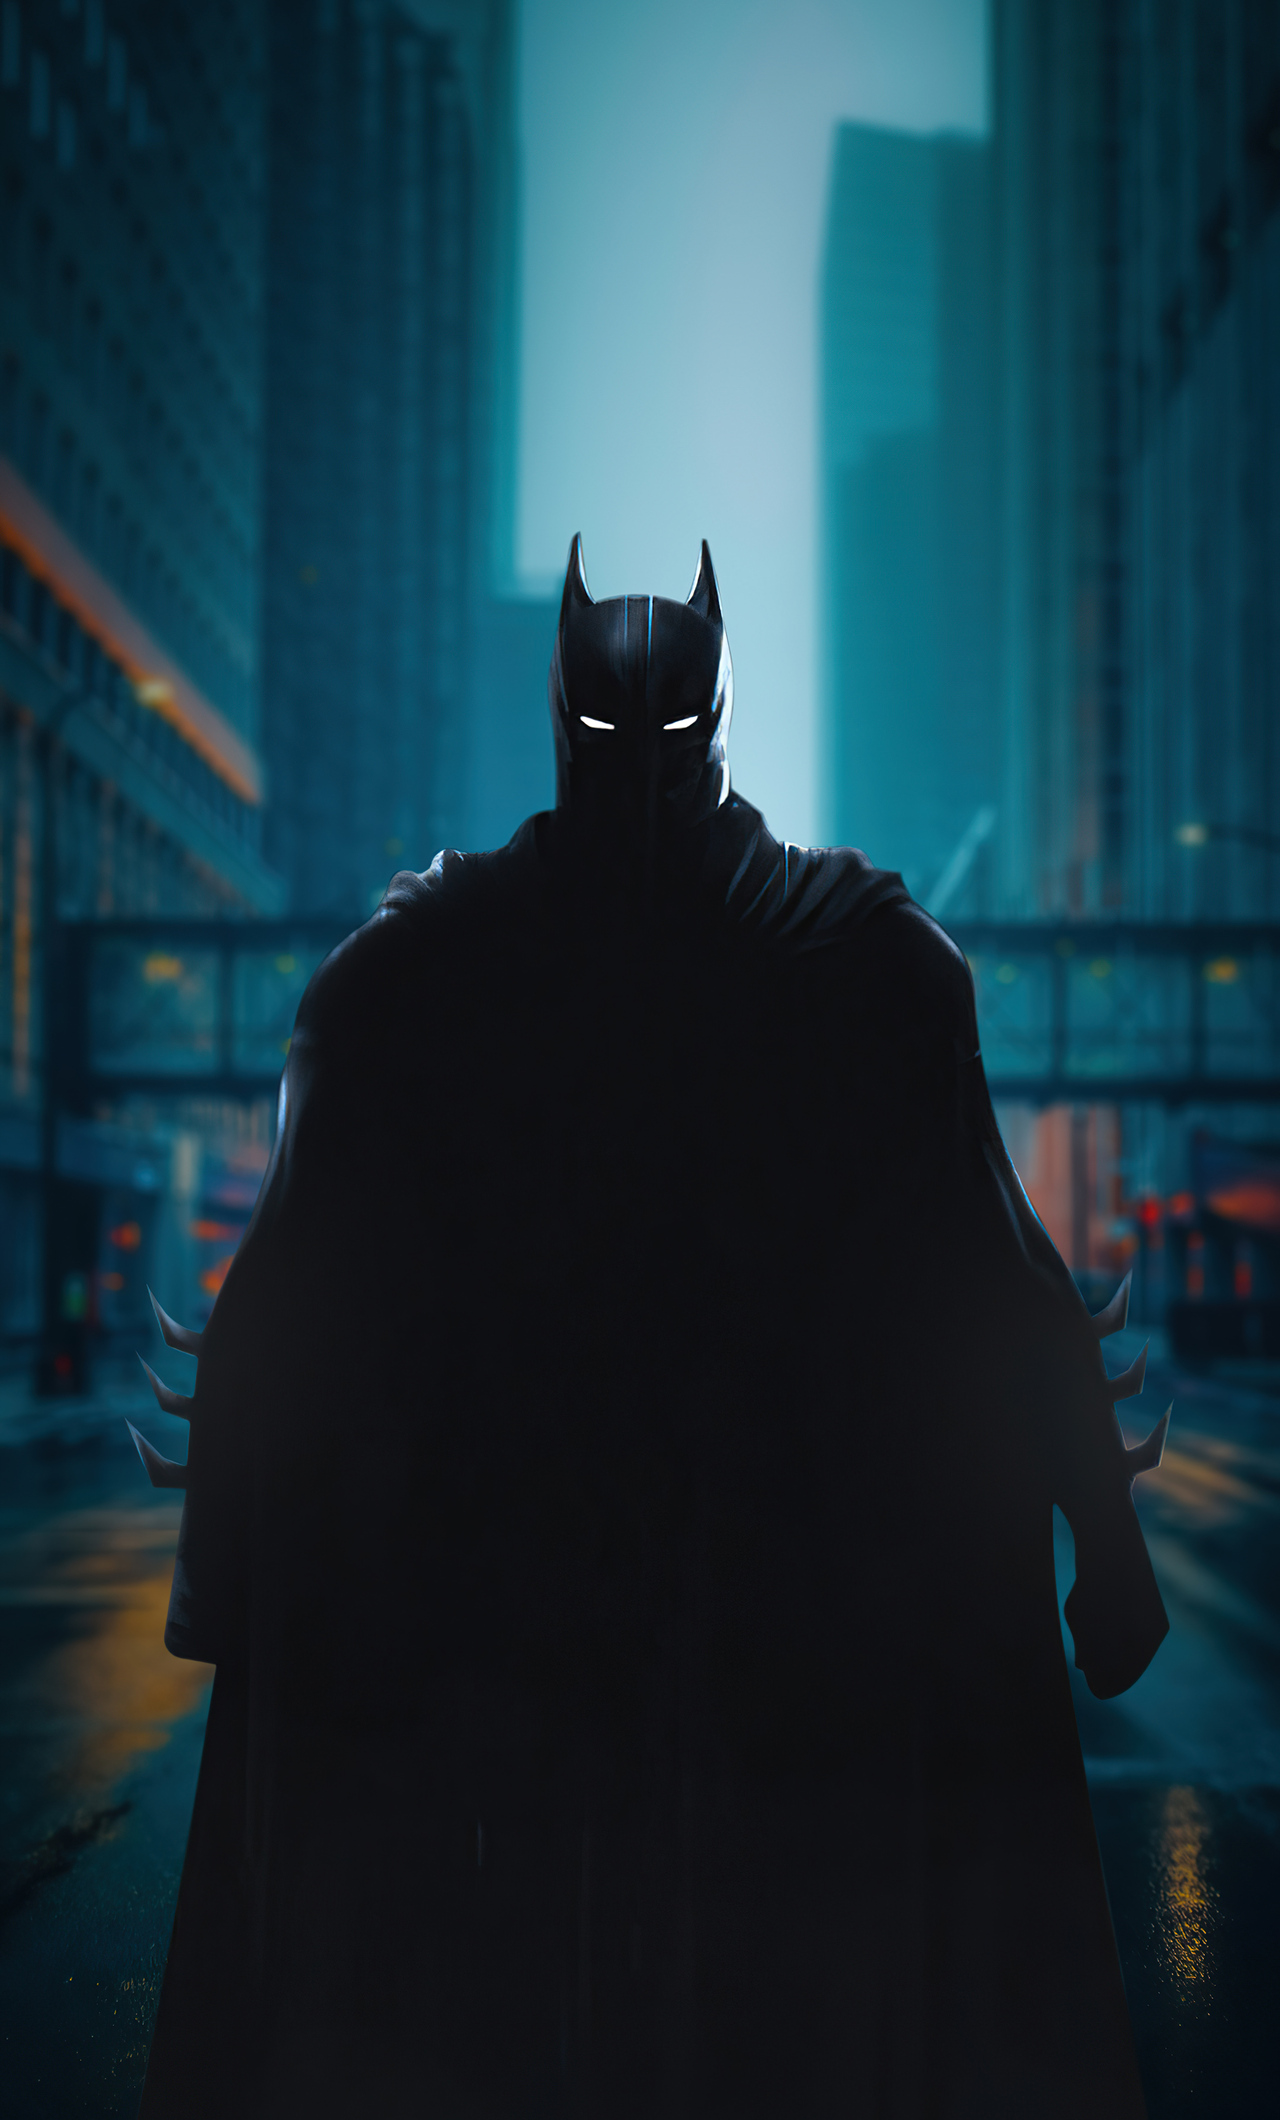 The Batman I Am Vengeance 2021 iPhone HD 4k Wallpaper, Image, Background, Photo and Picture